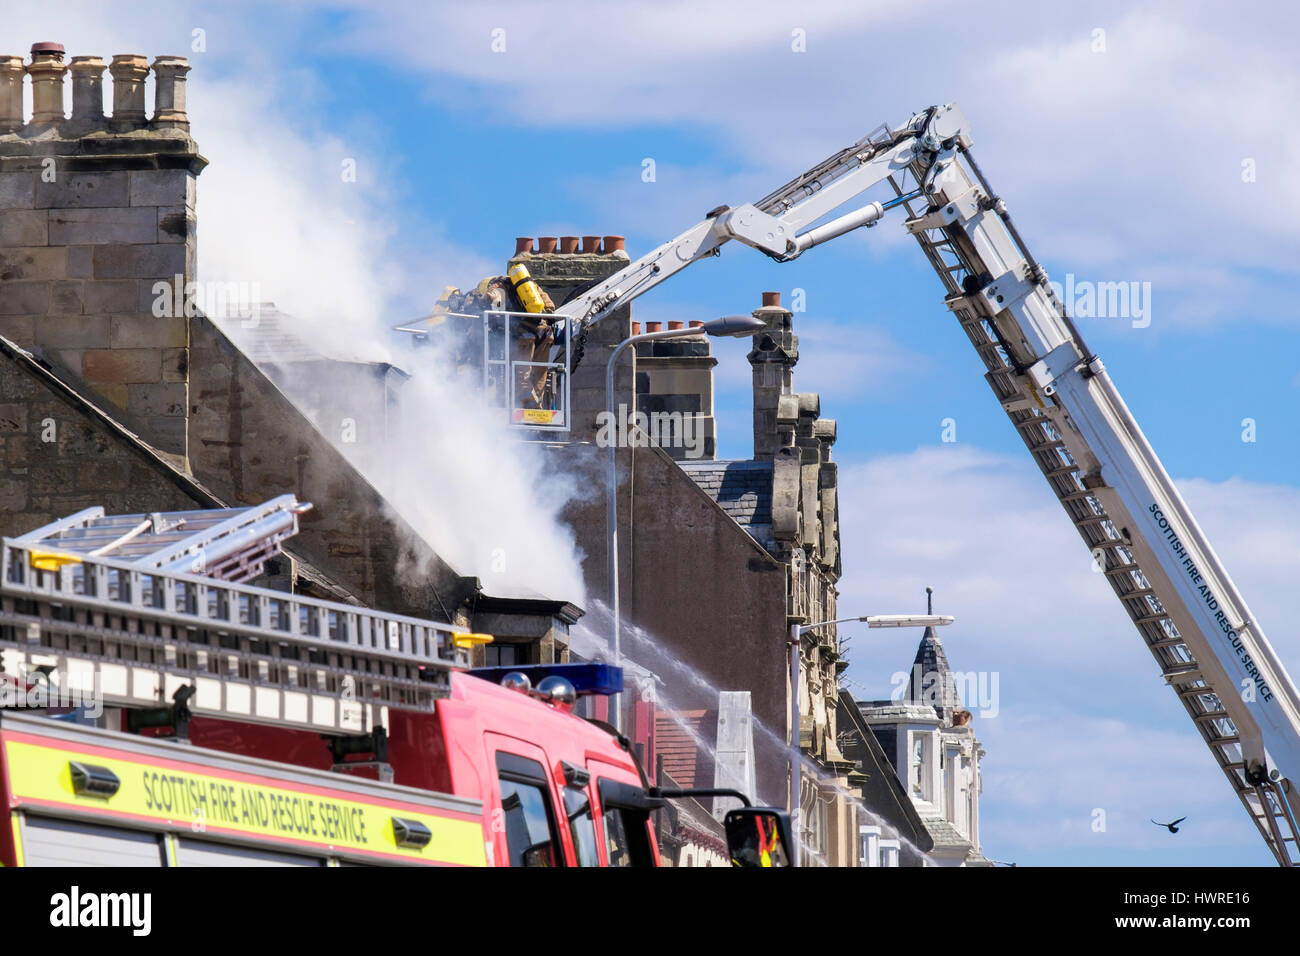 Scottish Fire and Rescue Service firefighters up a ladder fighting a blazing building. Elie and Earlsferry, Fife, Scotland, UK, Britain, Europe Stock Photo